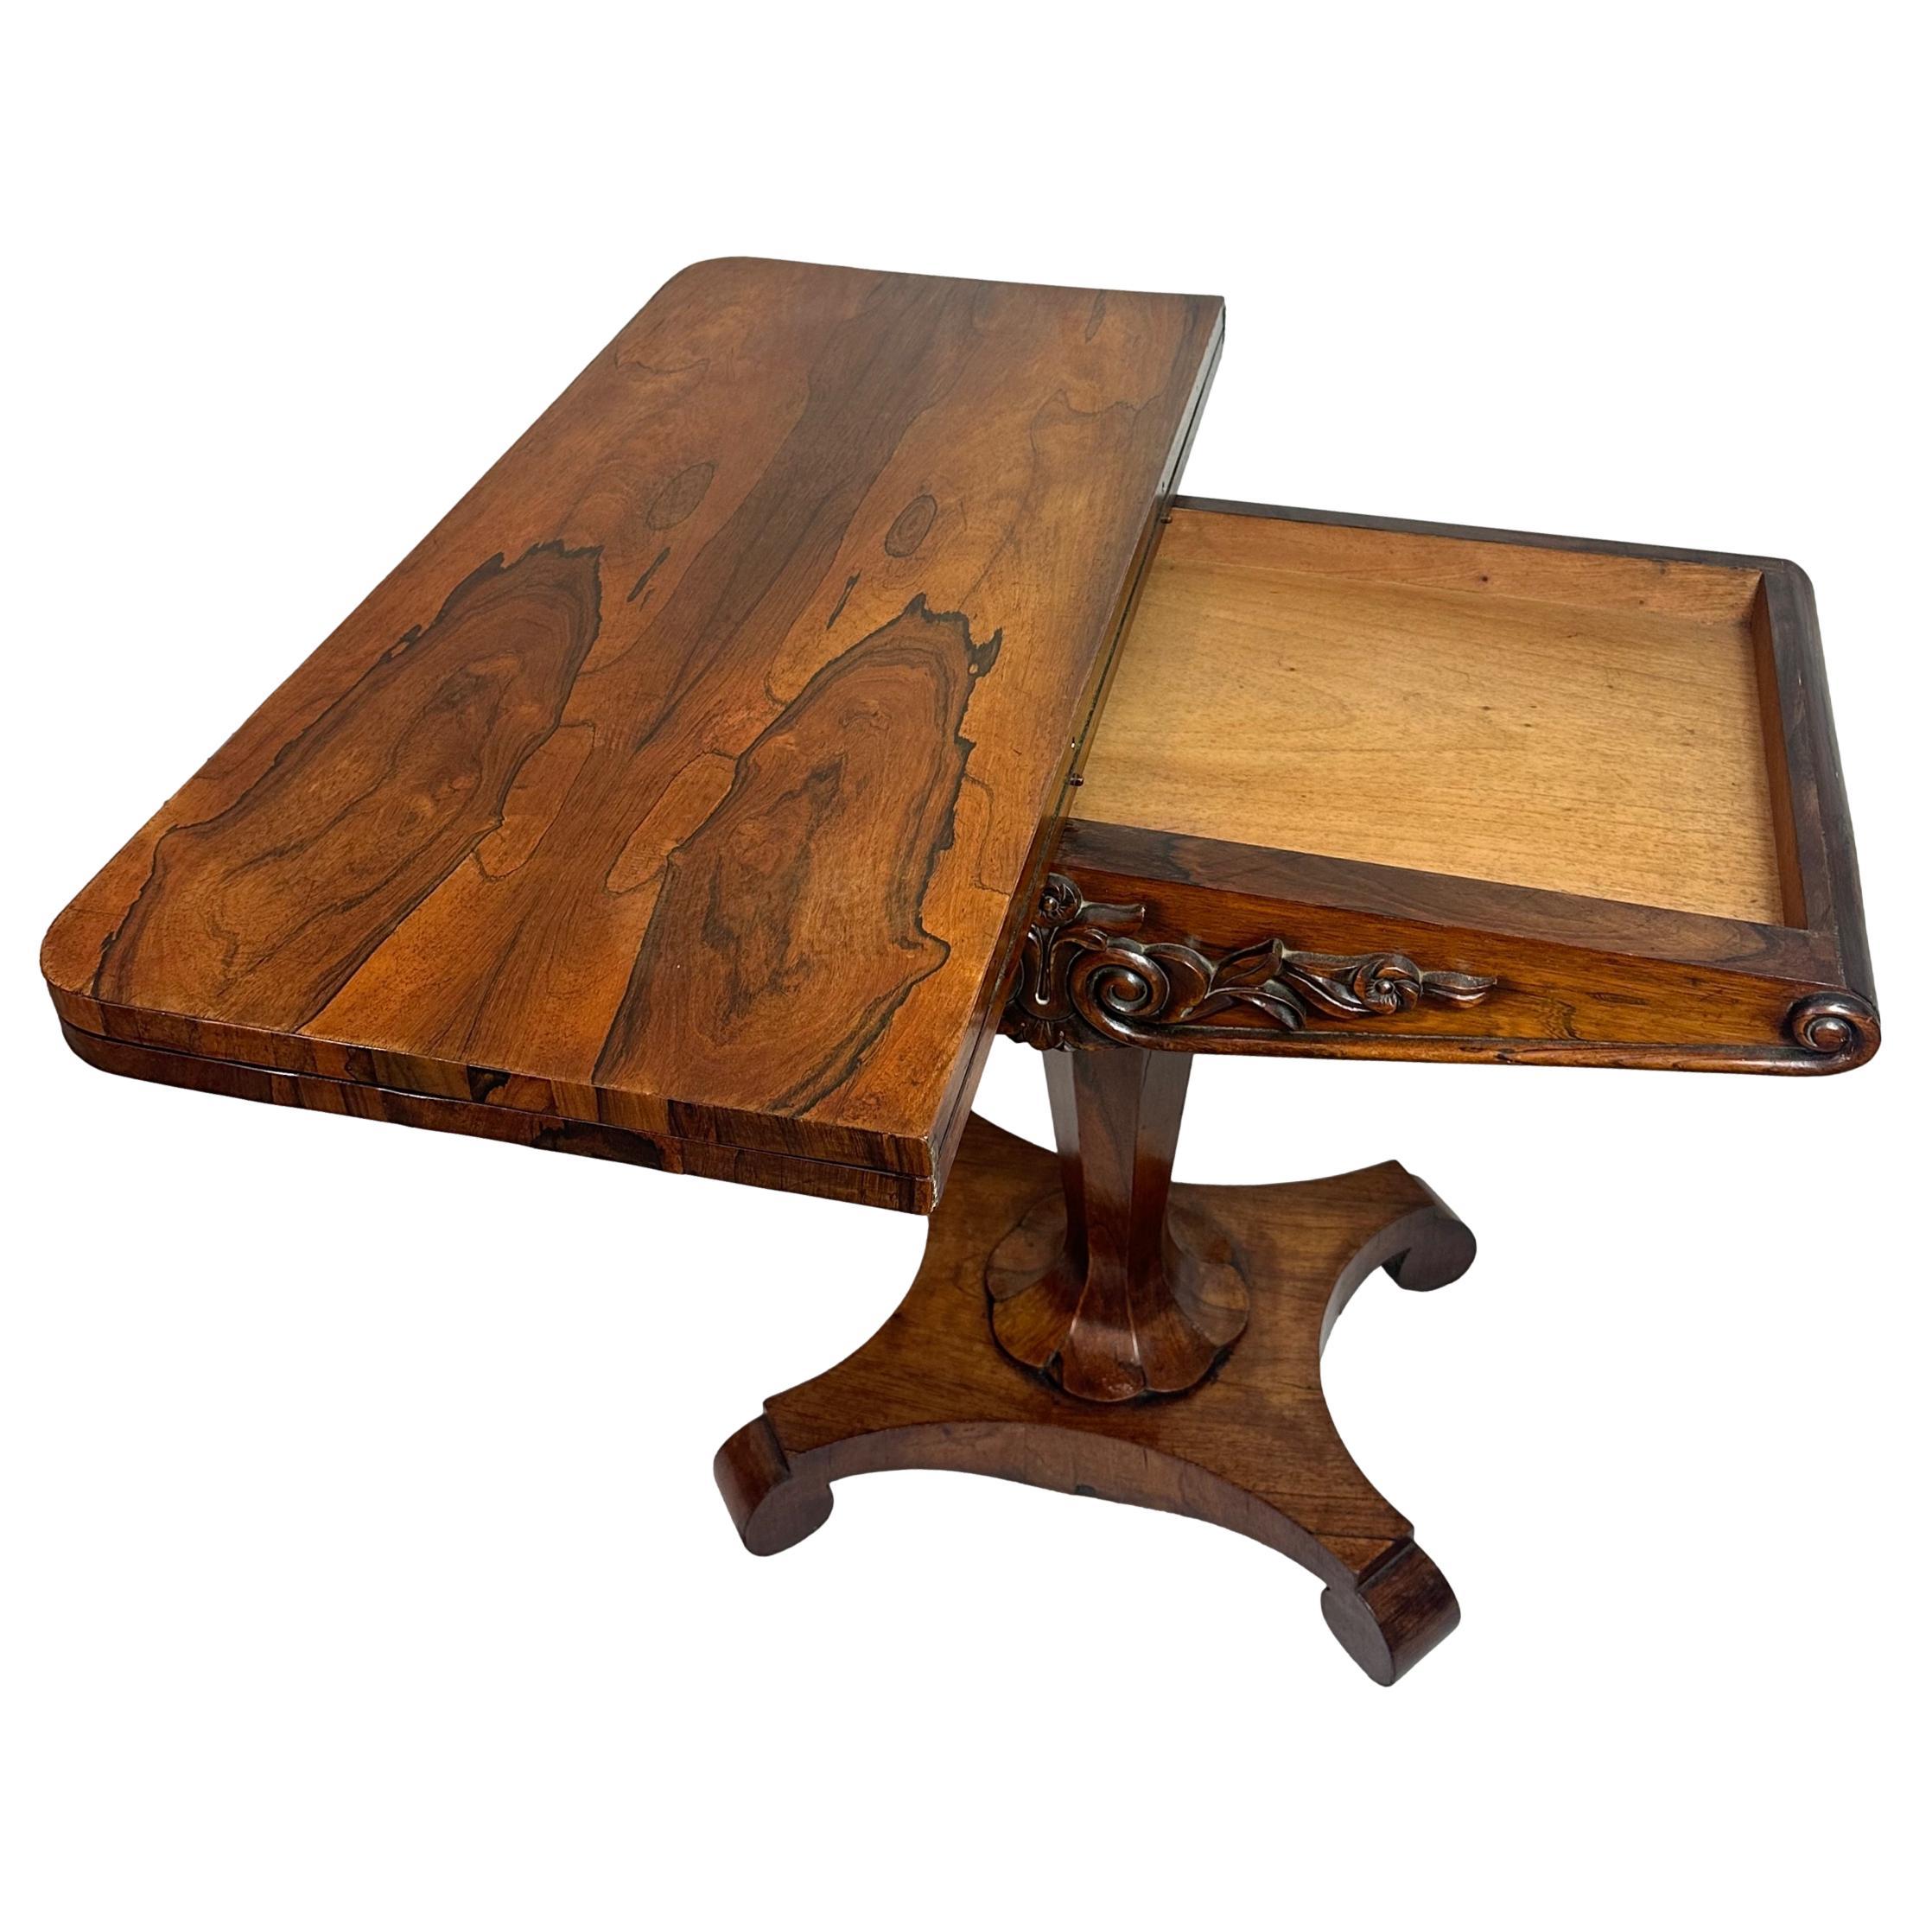 An Antique William IV Rosewood Period Card Table & Side Table, English, ca. 1835 For Sale 2